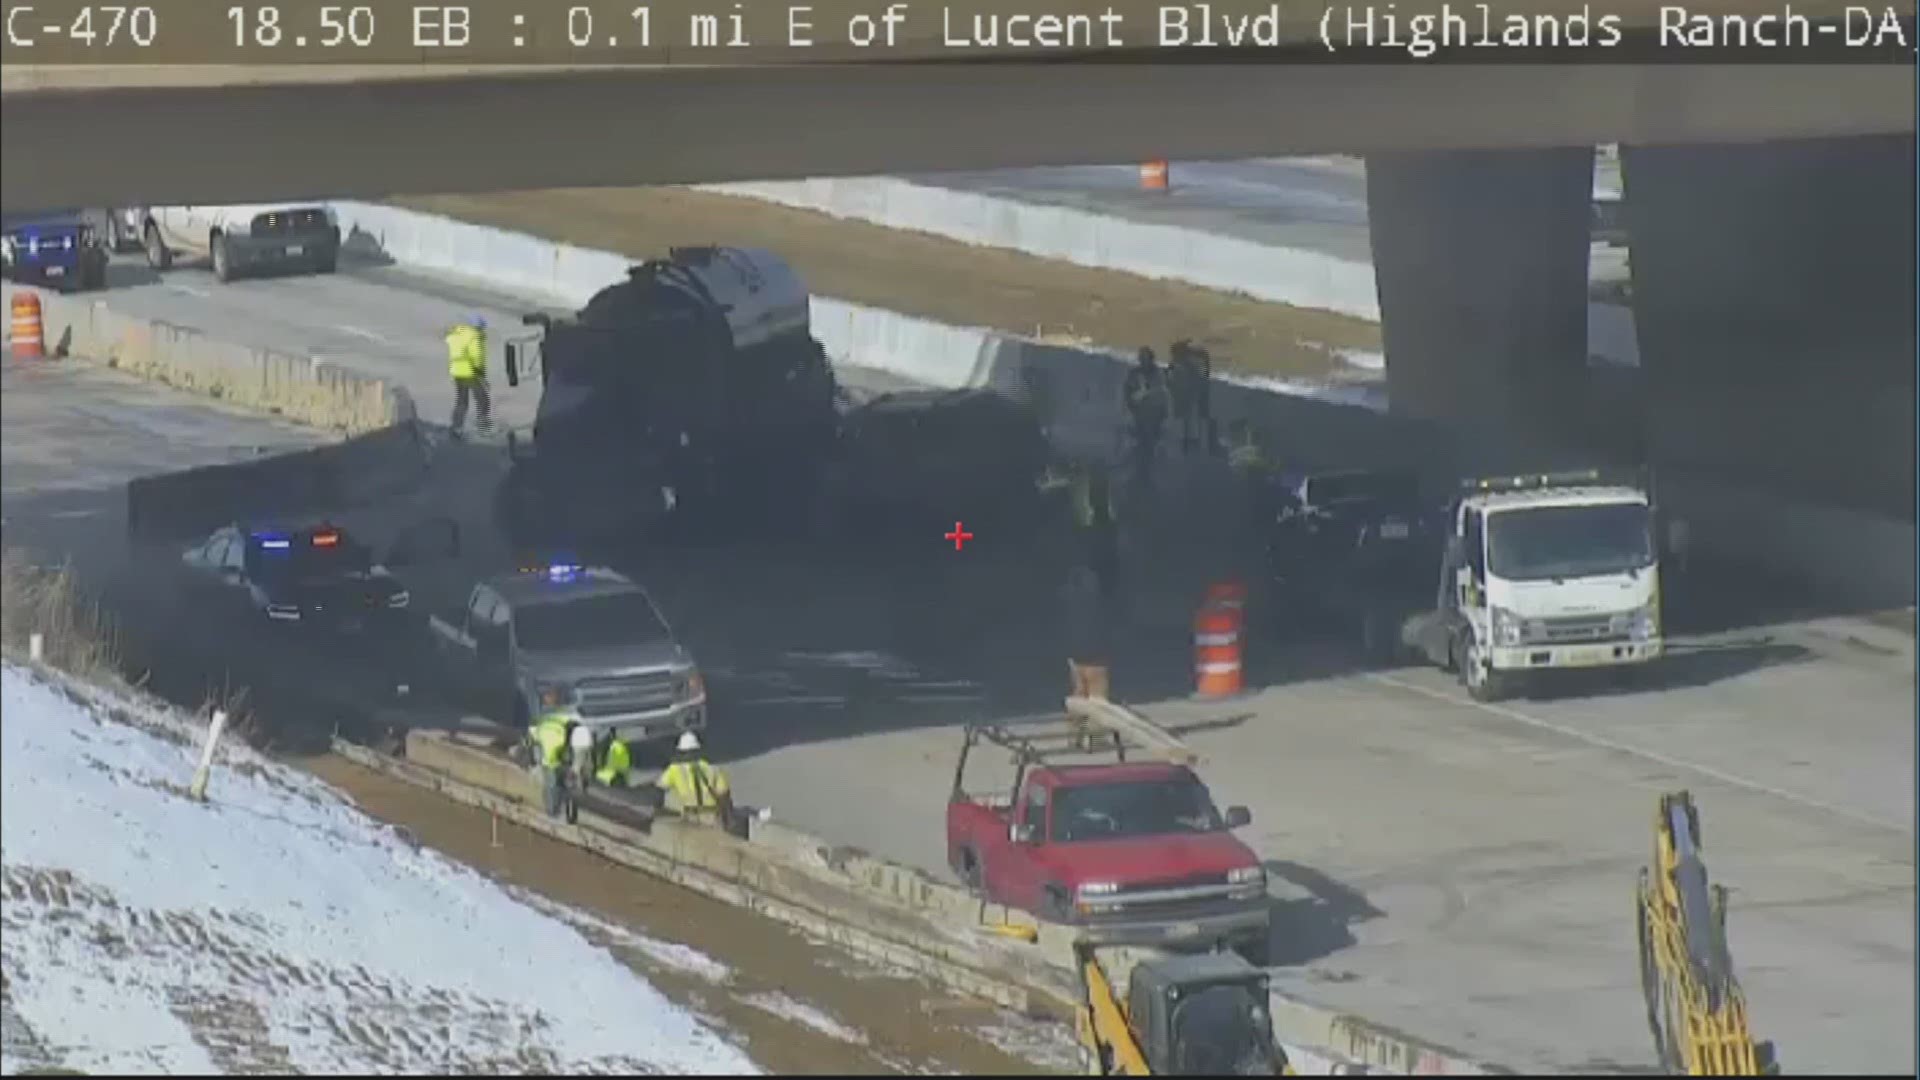 A flagger for a construction company was injured in the crash Friday morning on C470 under Lucent Boulevard.